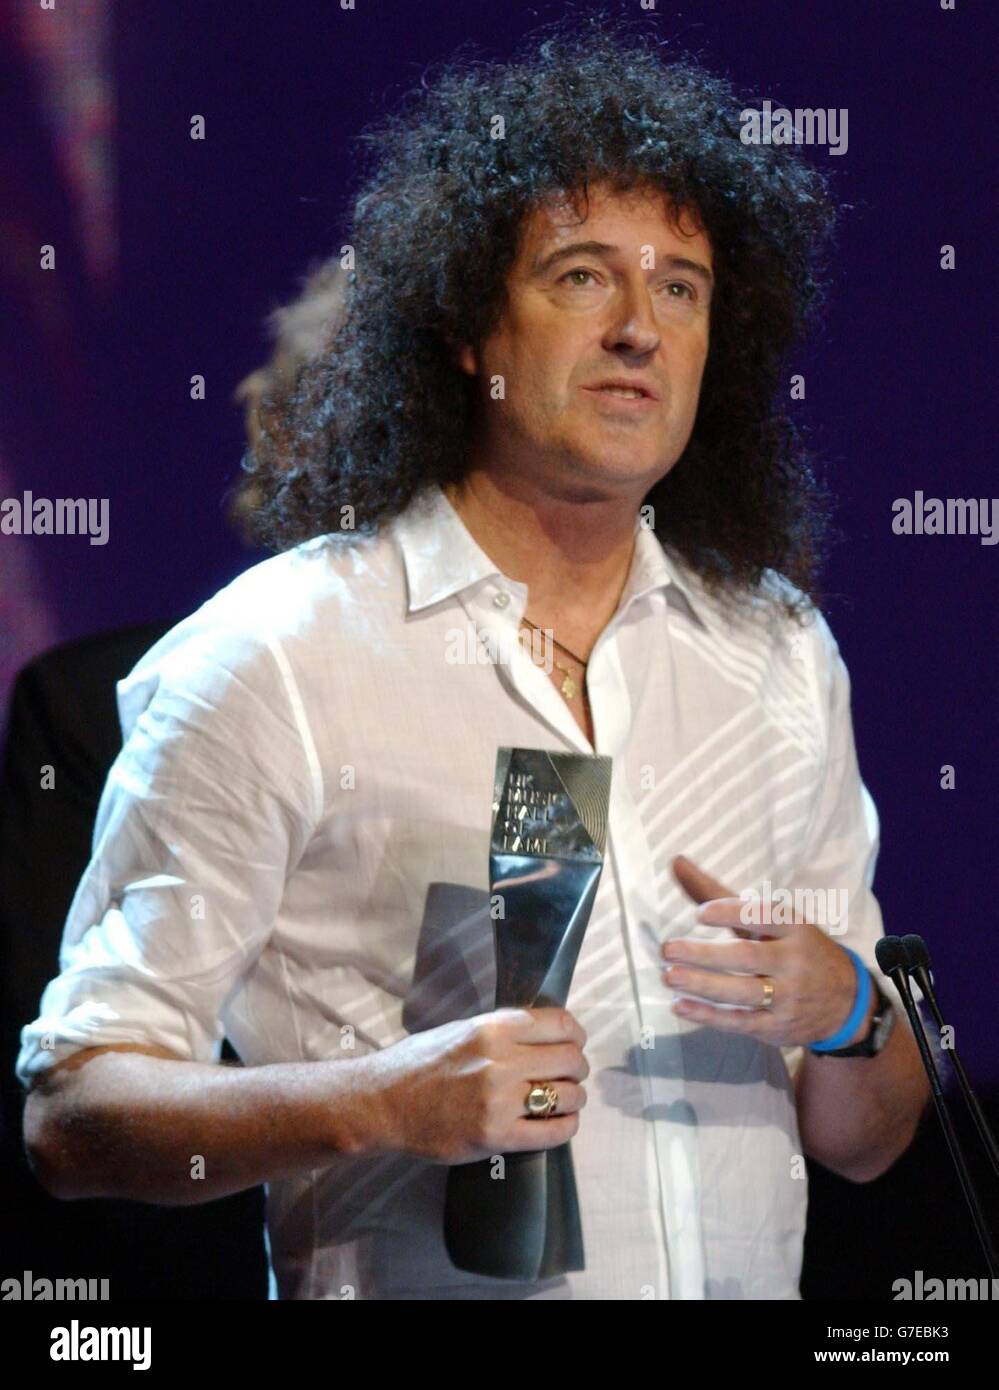 Brian May from Queen receives the audience vote for the 70s decade, during the UK Music Hall Of Fame - live final, at the Hackney Empire in east London. The Channel 4 series looking at popular music from the 1950s to the 1980s, has been asking the public to vote on who should enter the Hall Of Fame, and winners are inducted this evening. Stock Photo